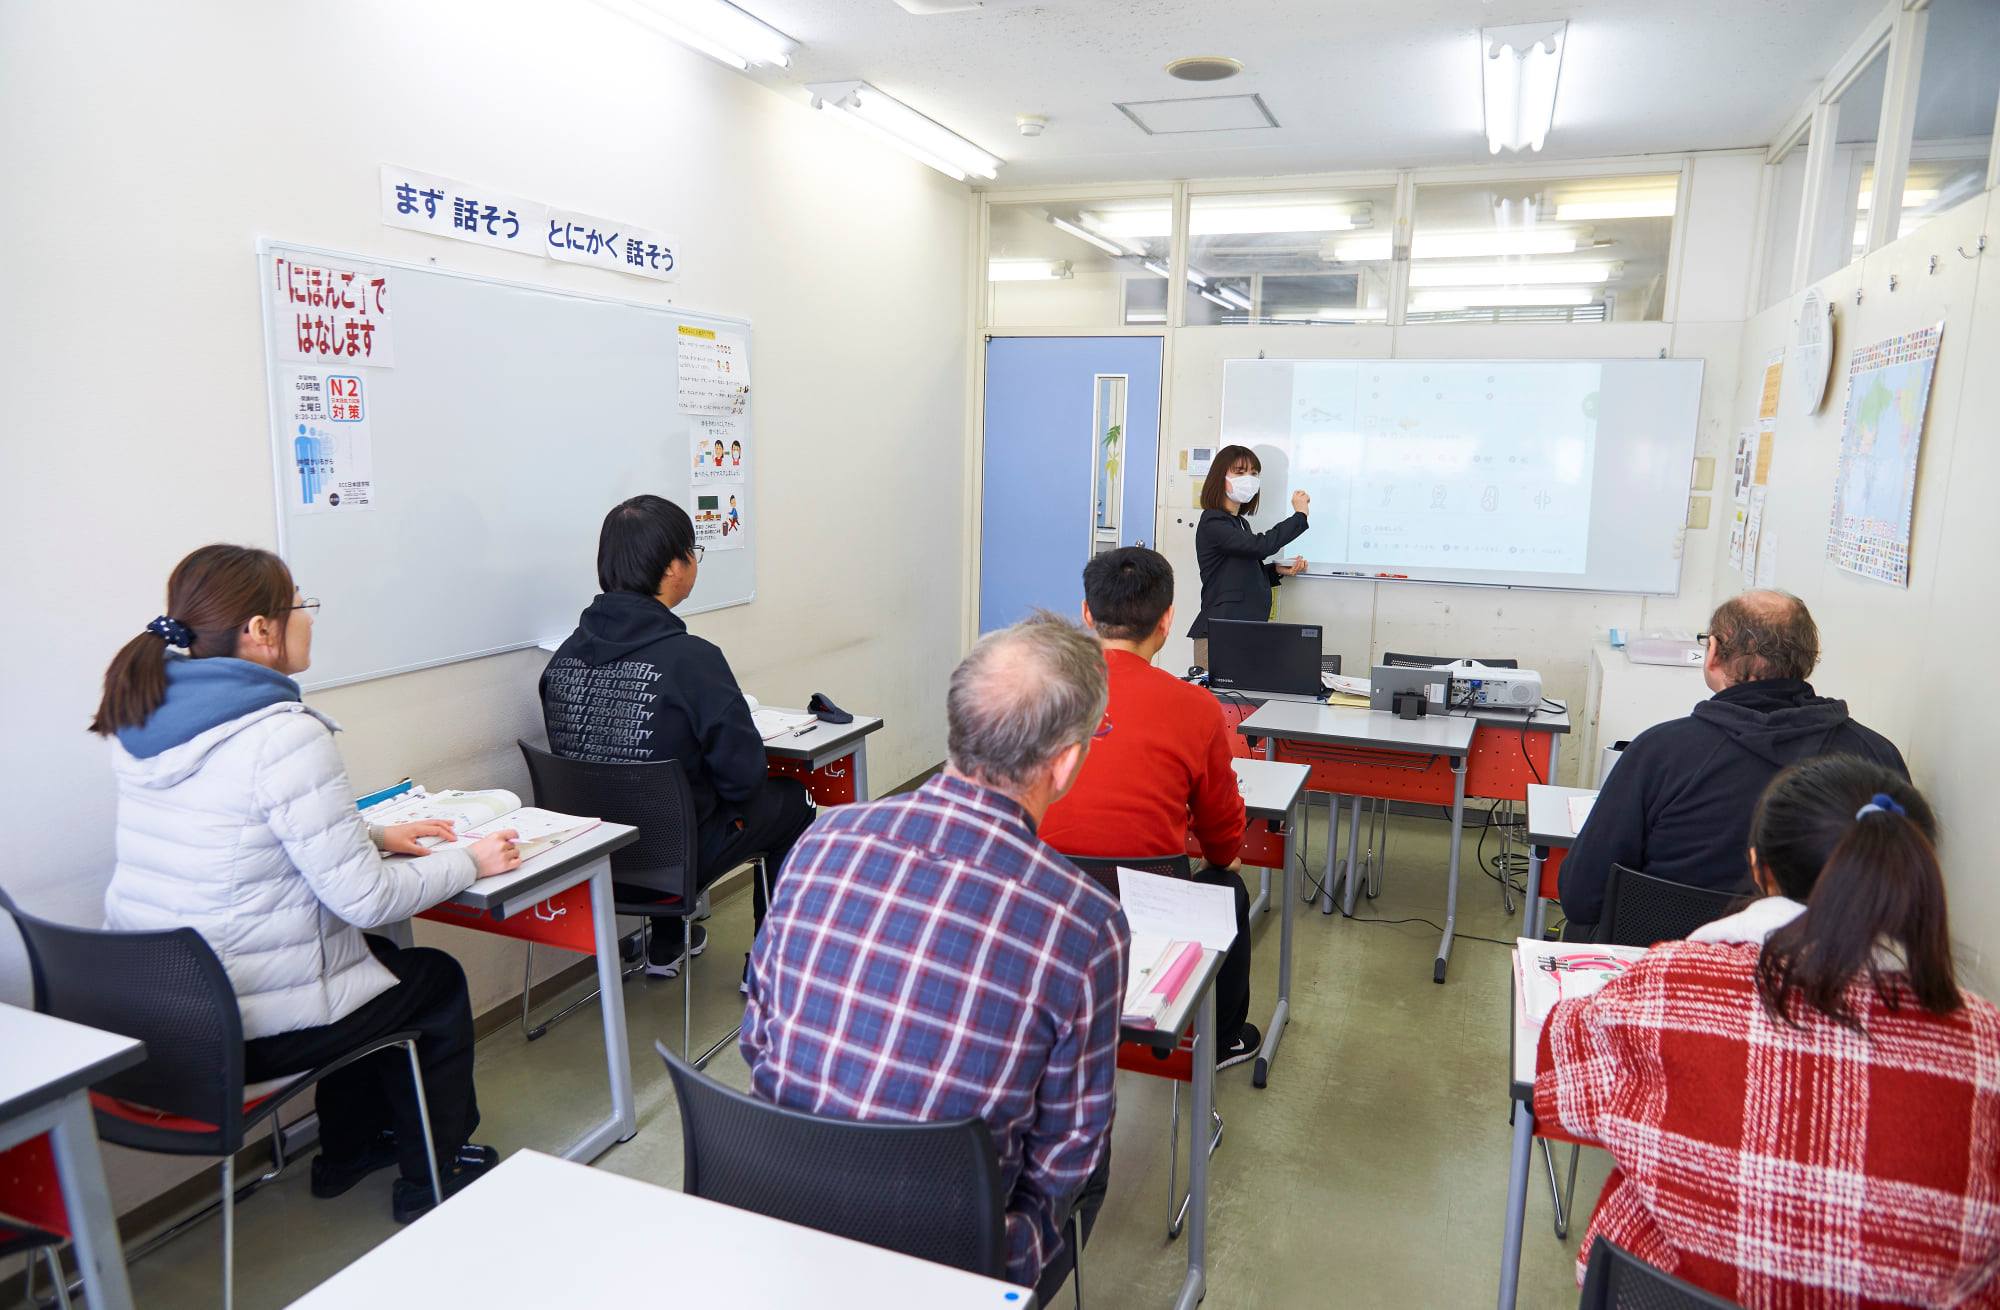 Article [Japanese Practical Conversation Course] 12/4 (Sat) Free trial lesson!Eye-catching image